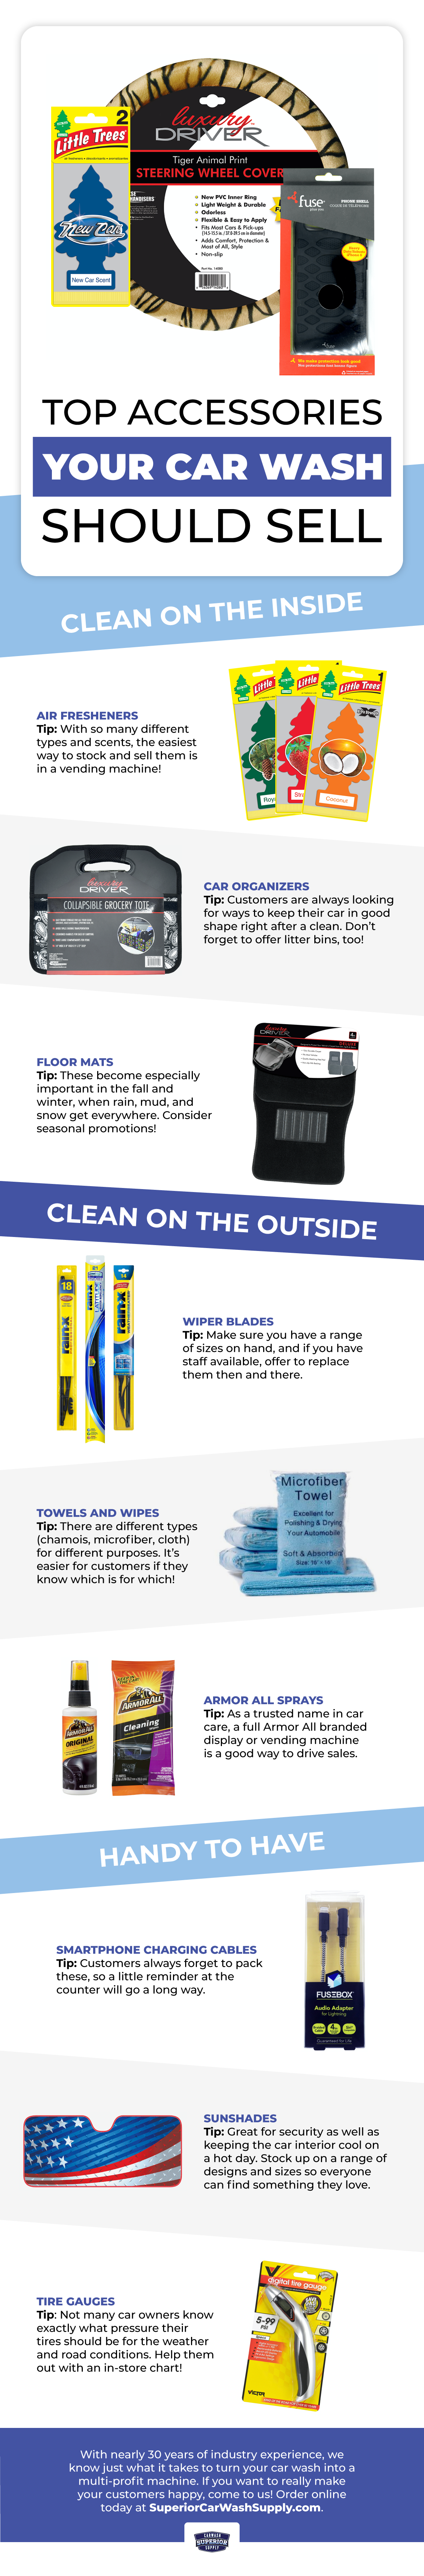 Top Accessories Your Car Wash Should Sell Infographic